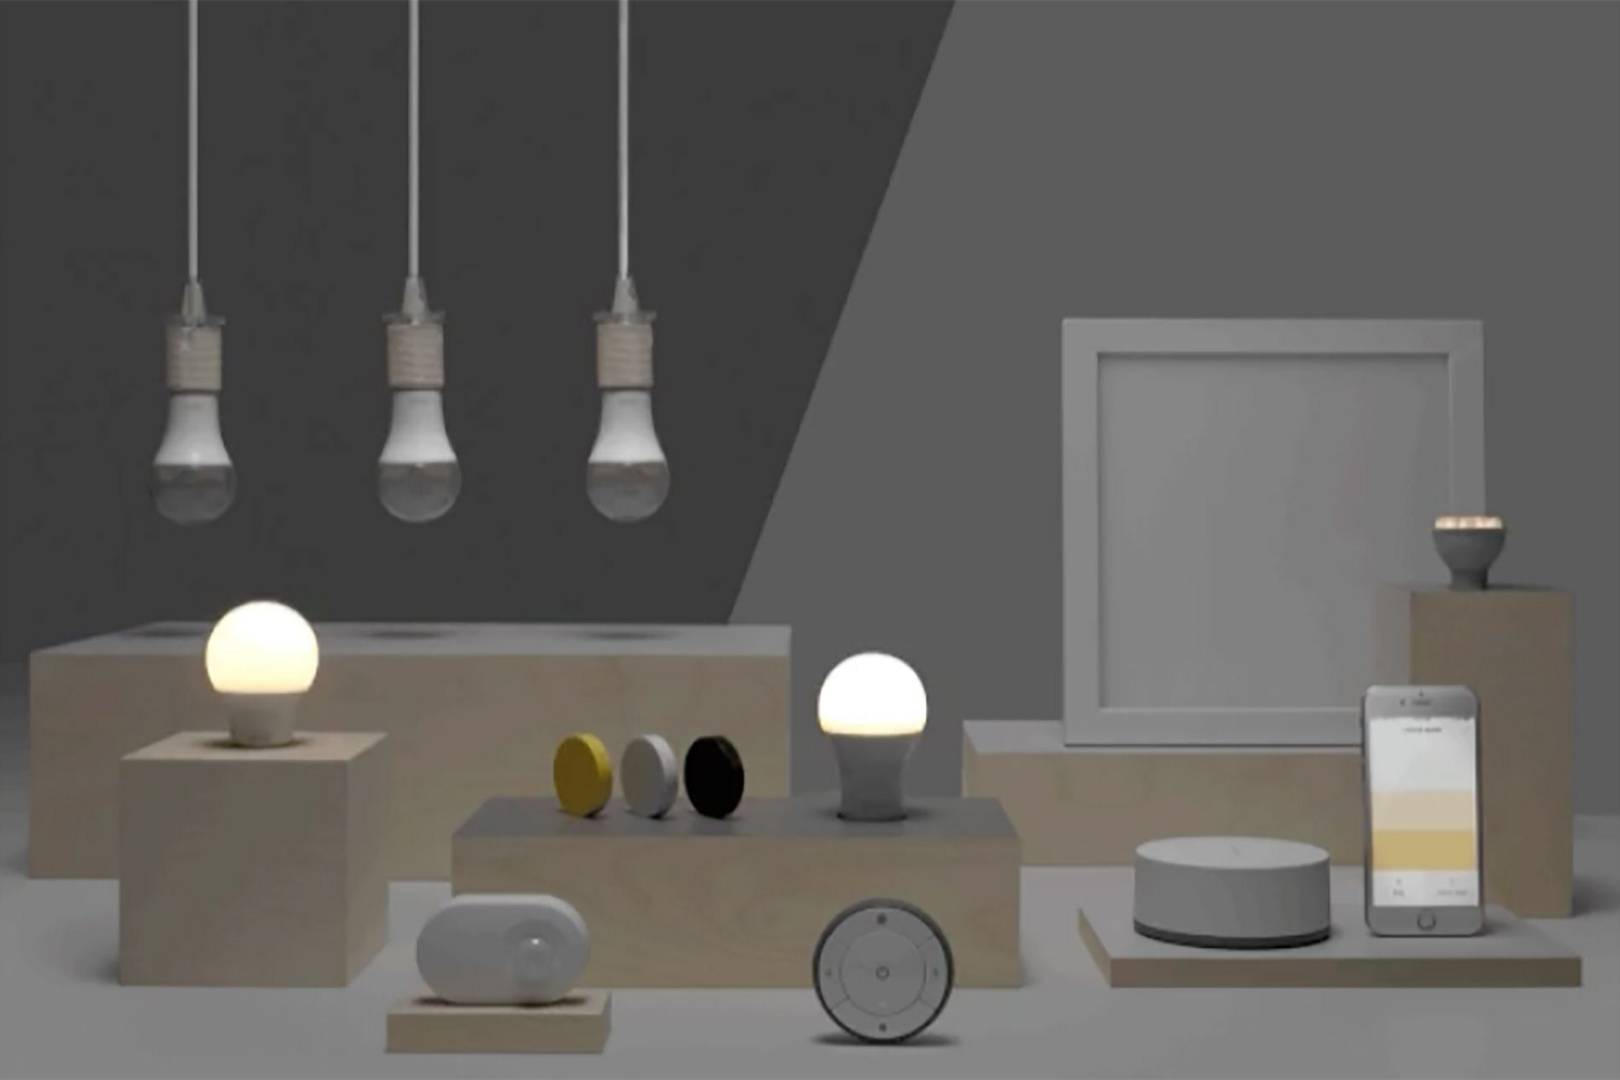 You will soon be able to control your £15 IKEA lights using just your voice